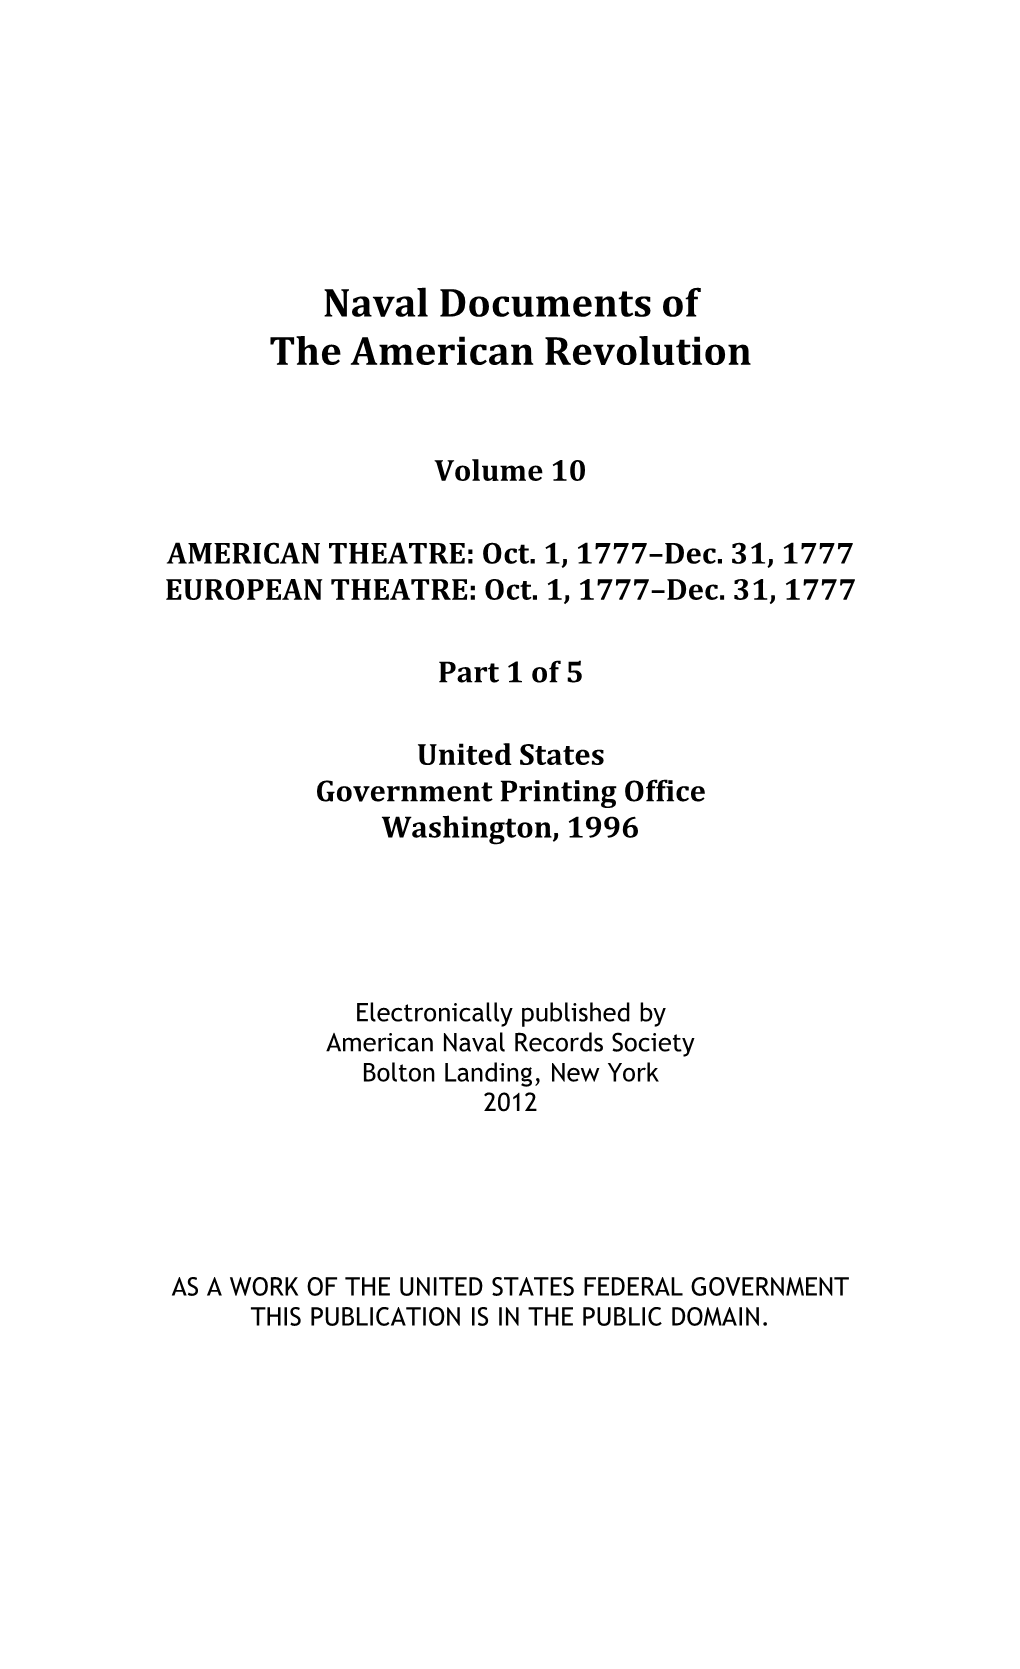 Naval Documents of the American Revolution, Volume 10, Part 1